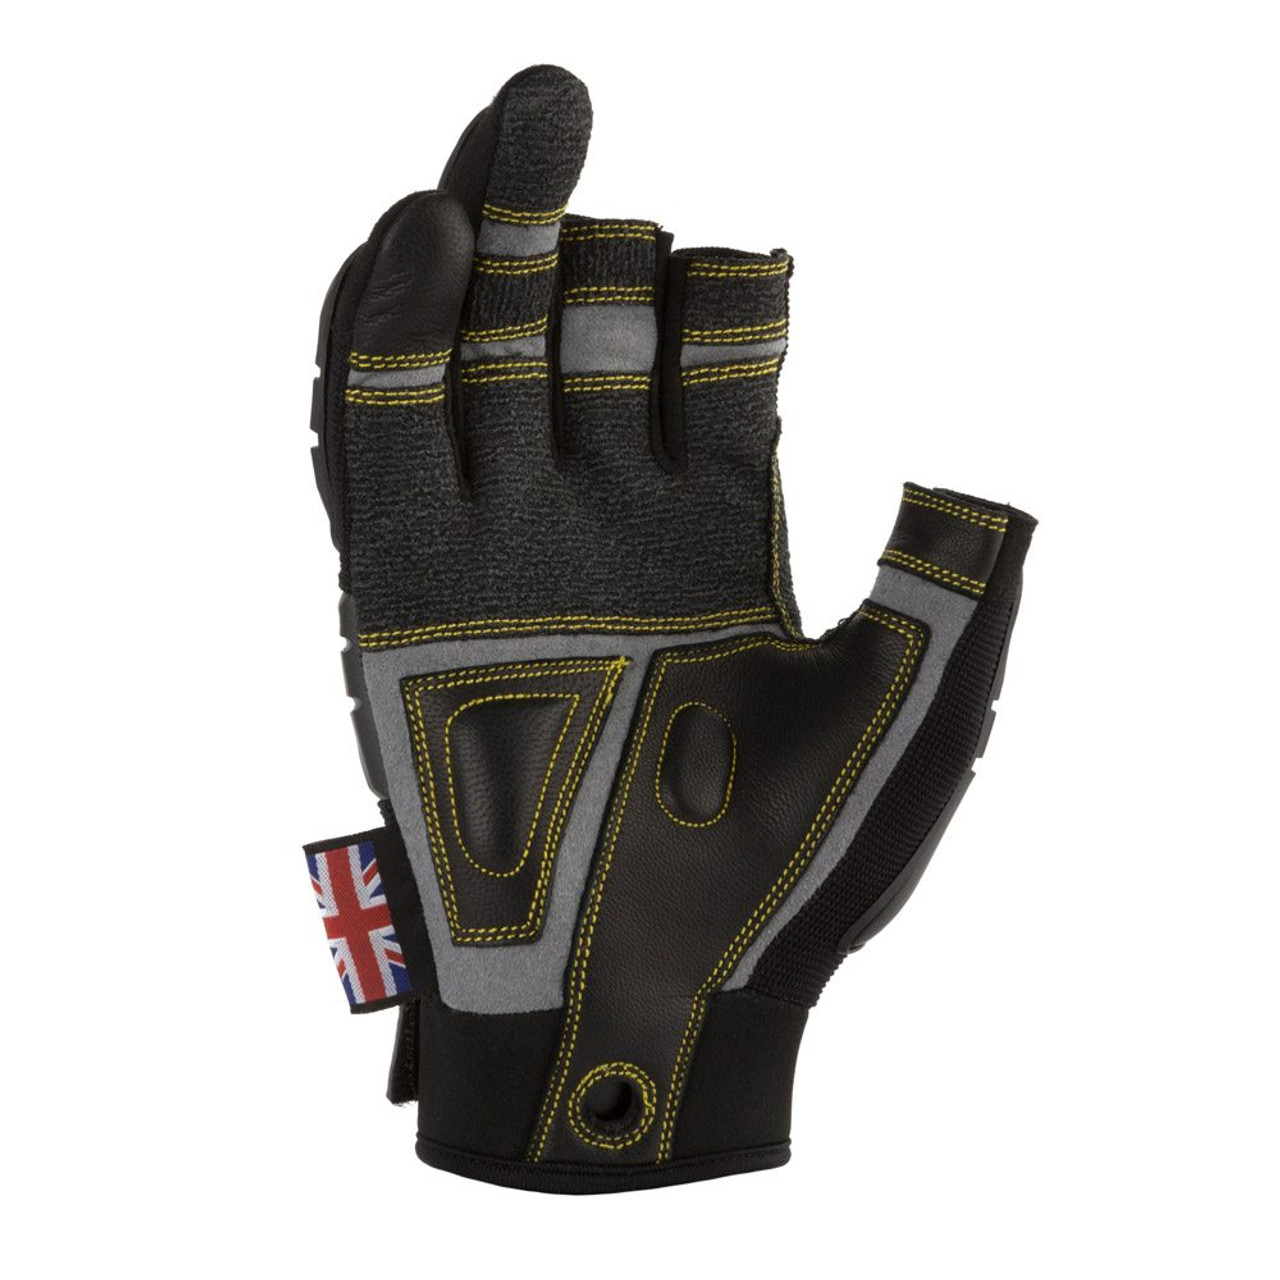 Dirty Rigger Gloves: Protector